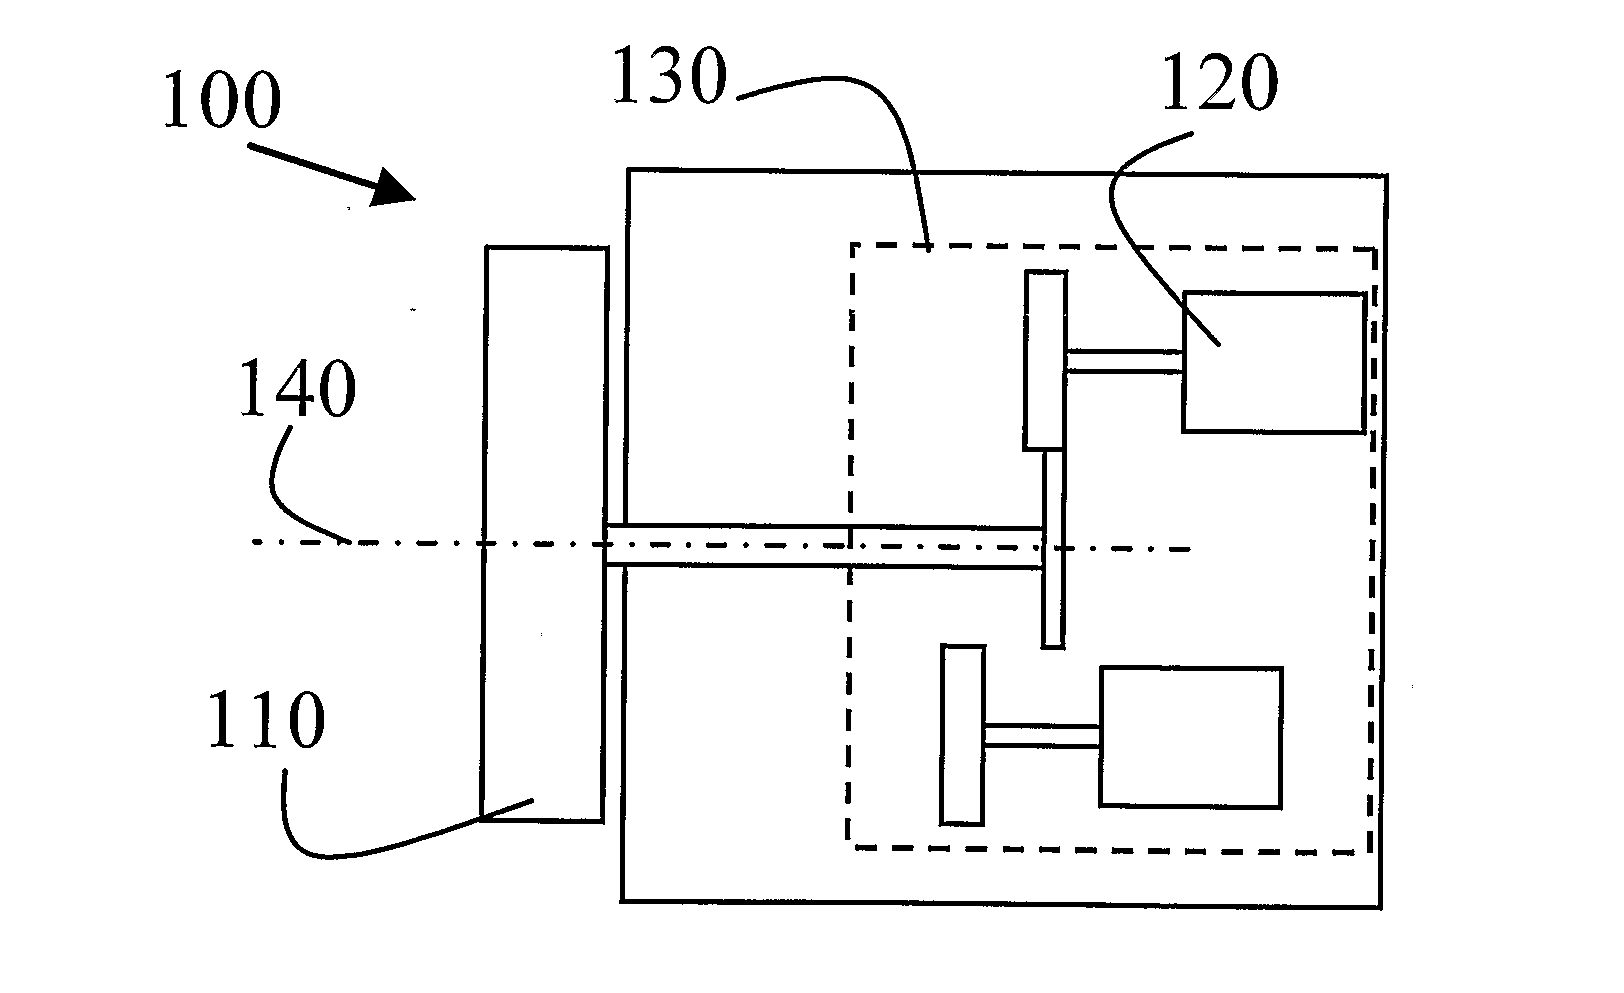 Illumination System Comprising A Light Source And A Control Unit And An Illumination Control System For Controlling A Light Source By Multiple User Interface Surfaces